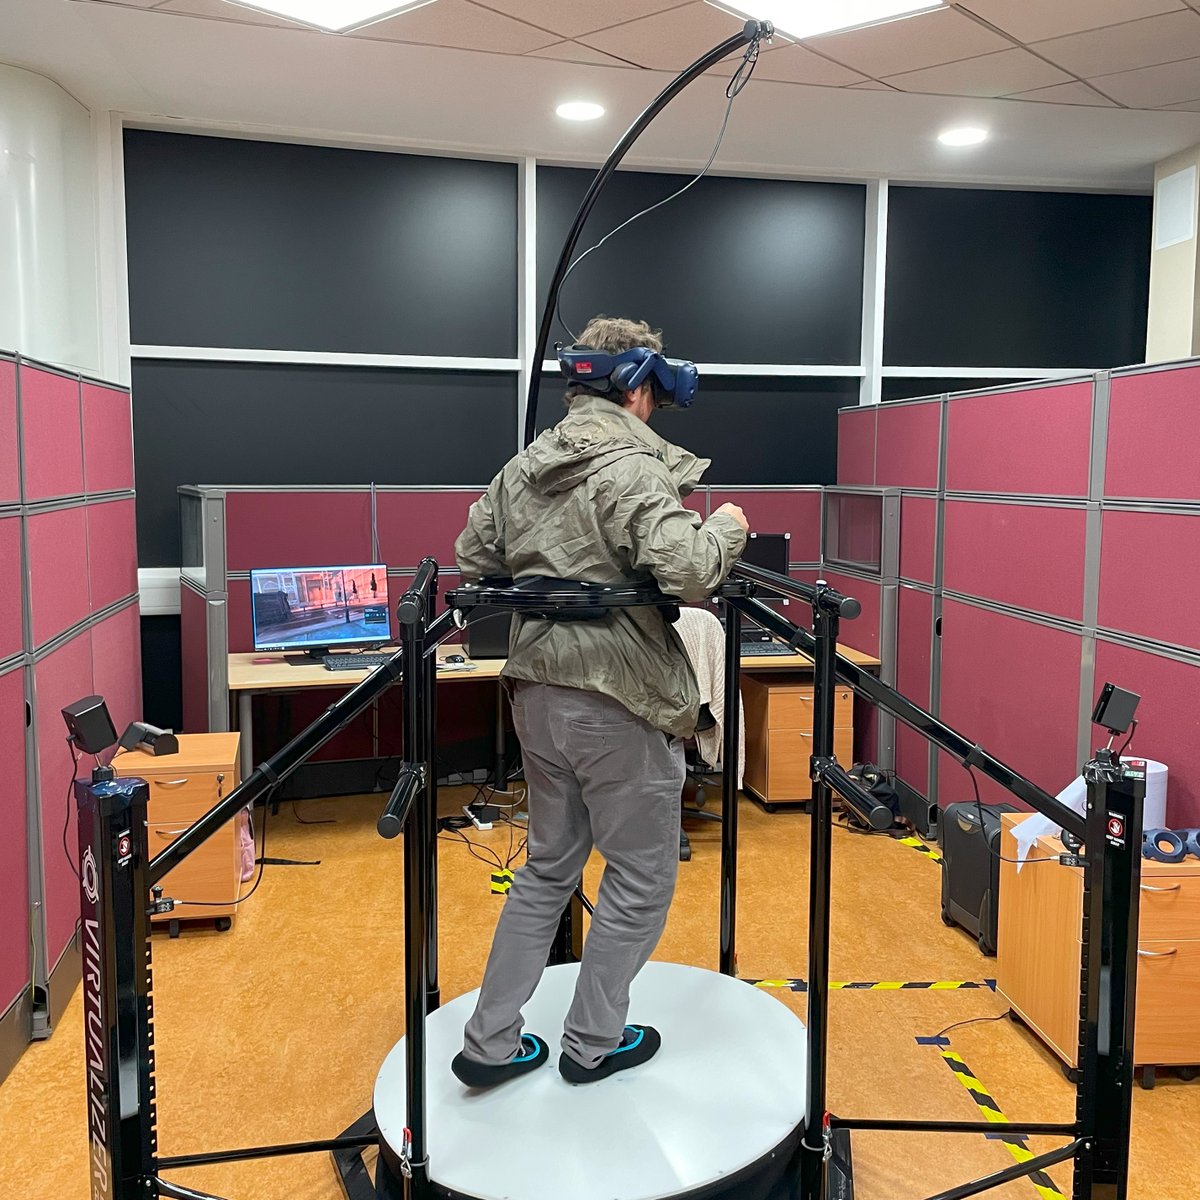 Thanks to Cardiff University for making time for us to come in and take some pictures of our recent installation last week. Our Account Manager even had a quick demo on their impressive Virtualizer VR platform while we were waiting! @Blustream_HDBT